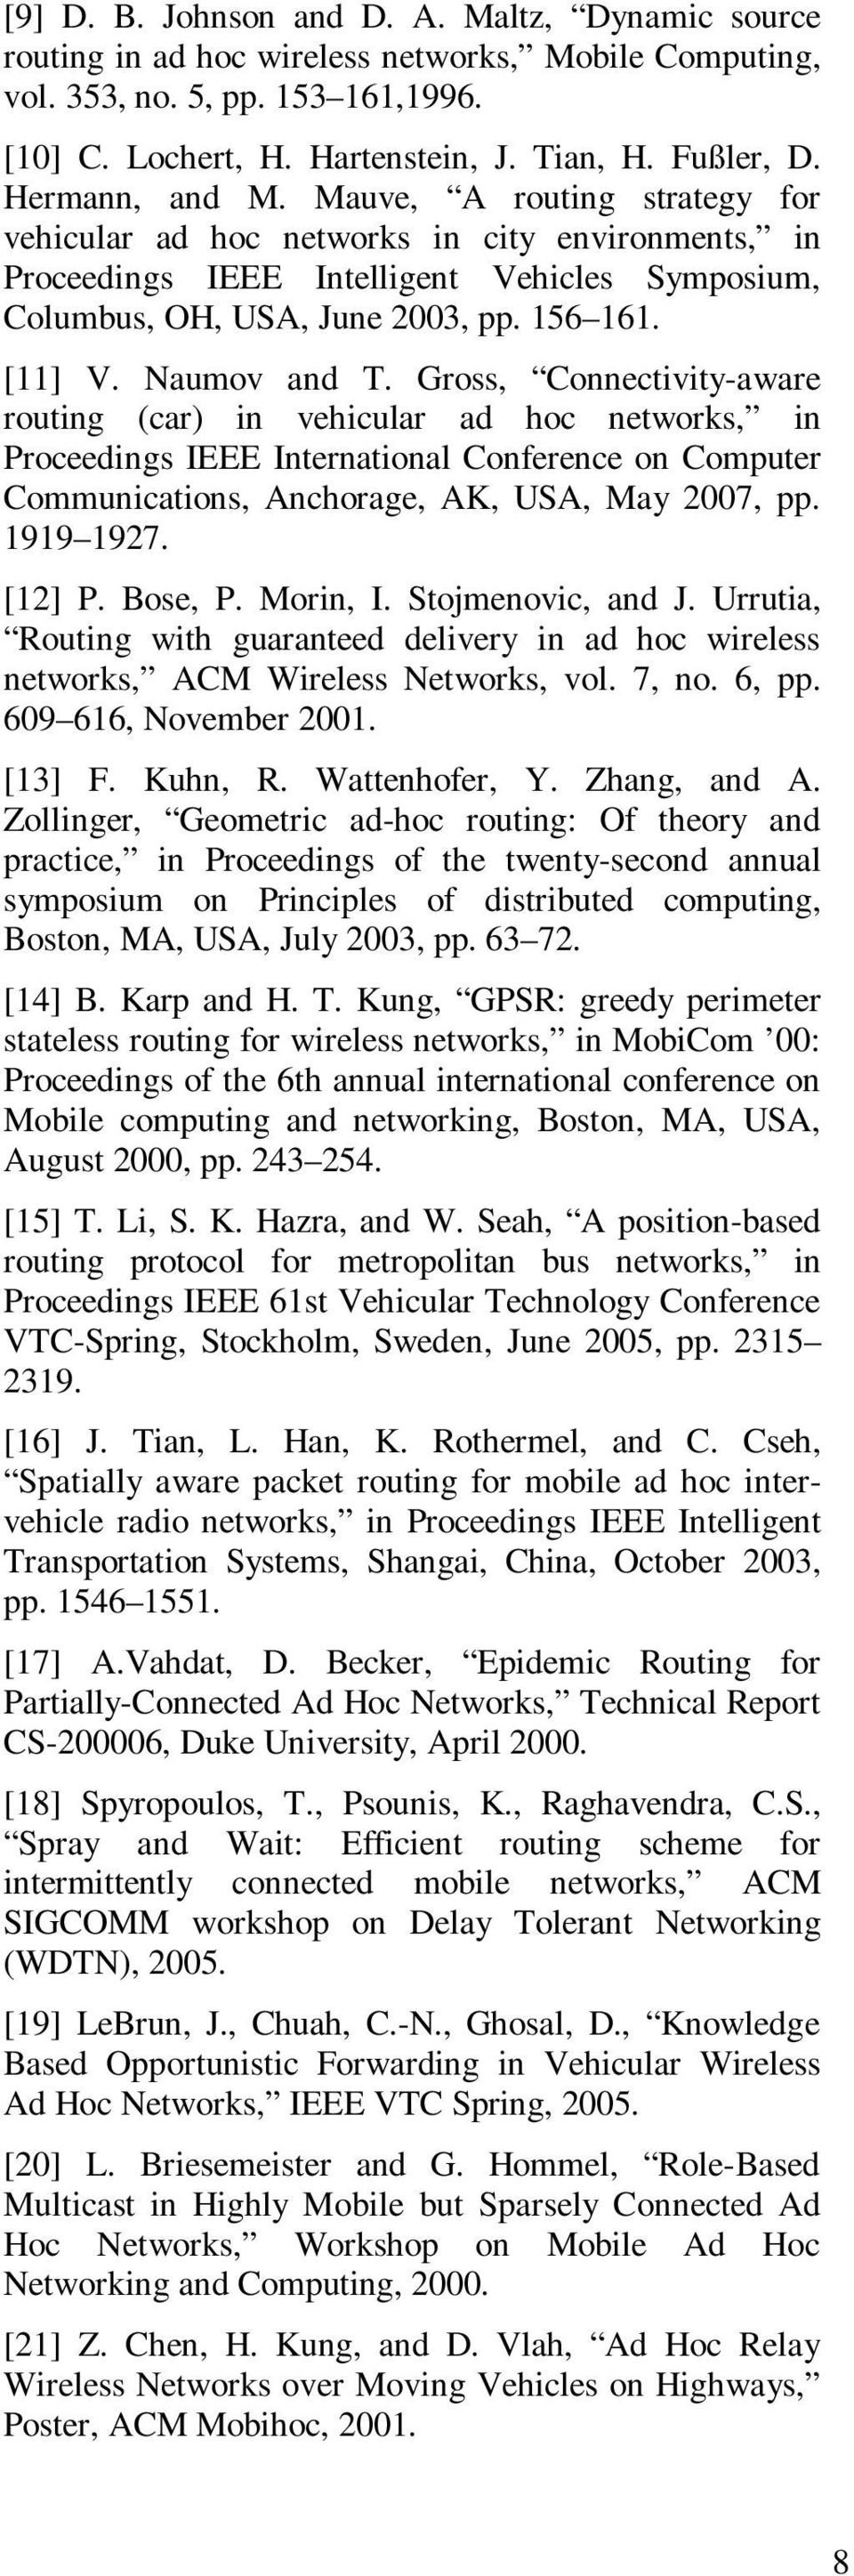 Naumov and T. Gross, Connectivity-aware routing (car) in vehicular ad hoc networks, in Proceedings IEEE International Conference on Computer Communications, Anchorage, AK, USA, May 2007, pp.